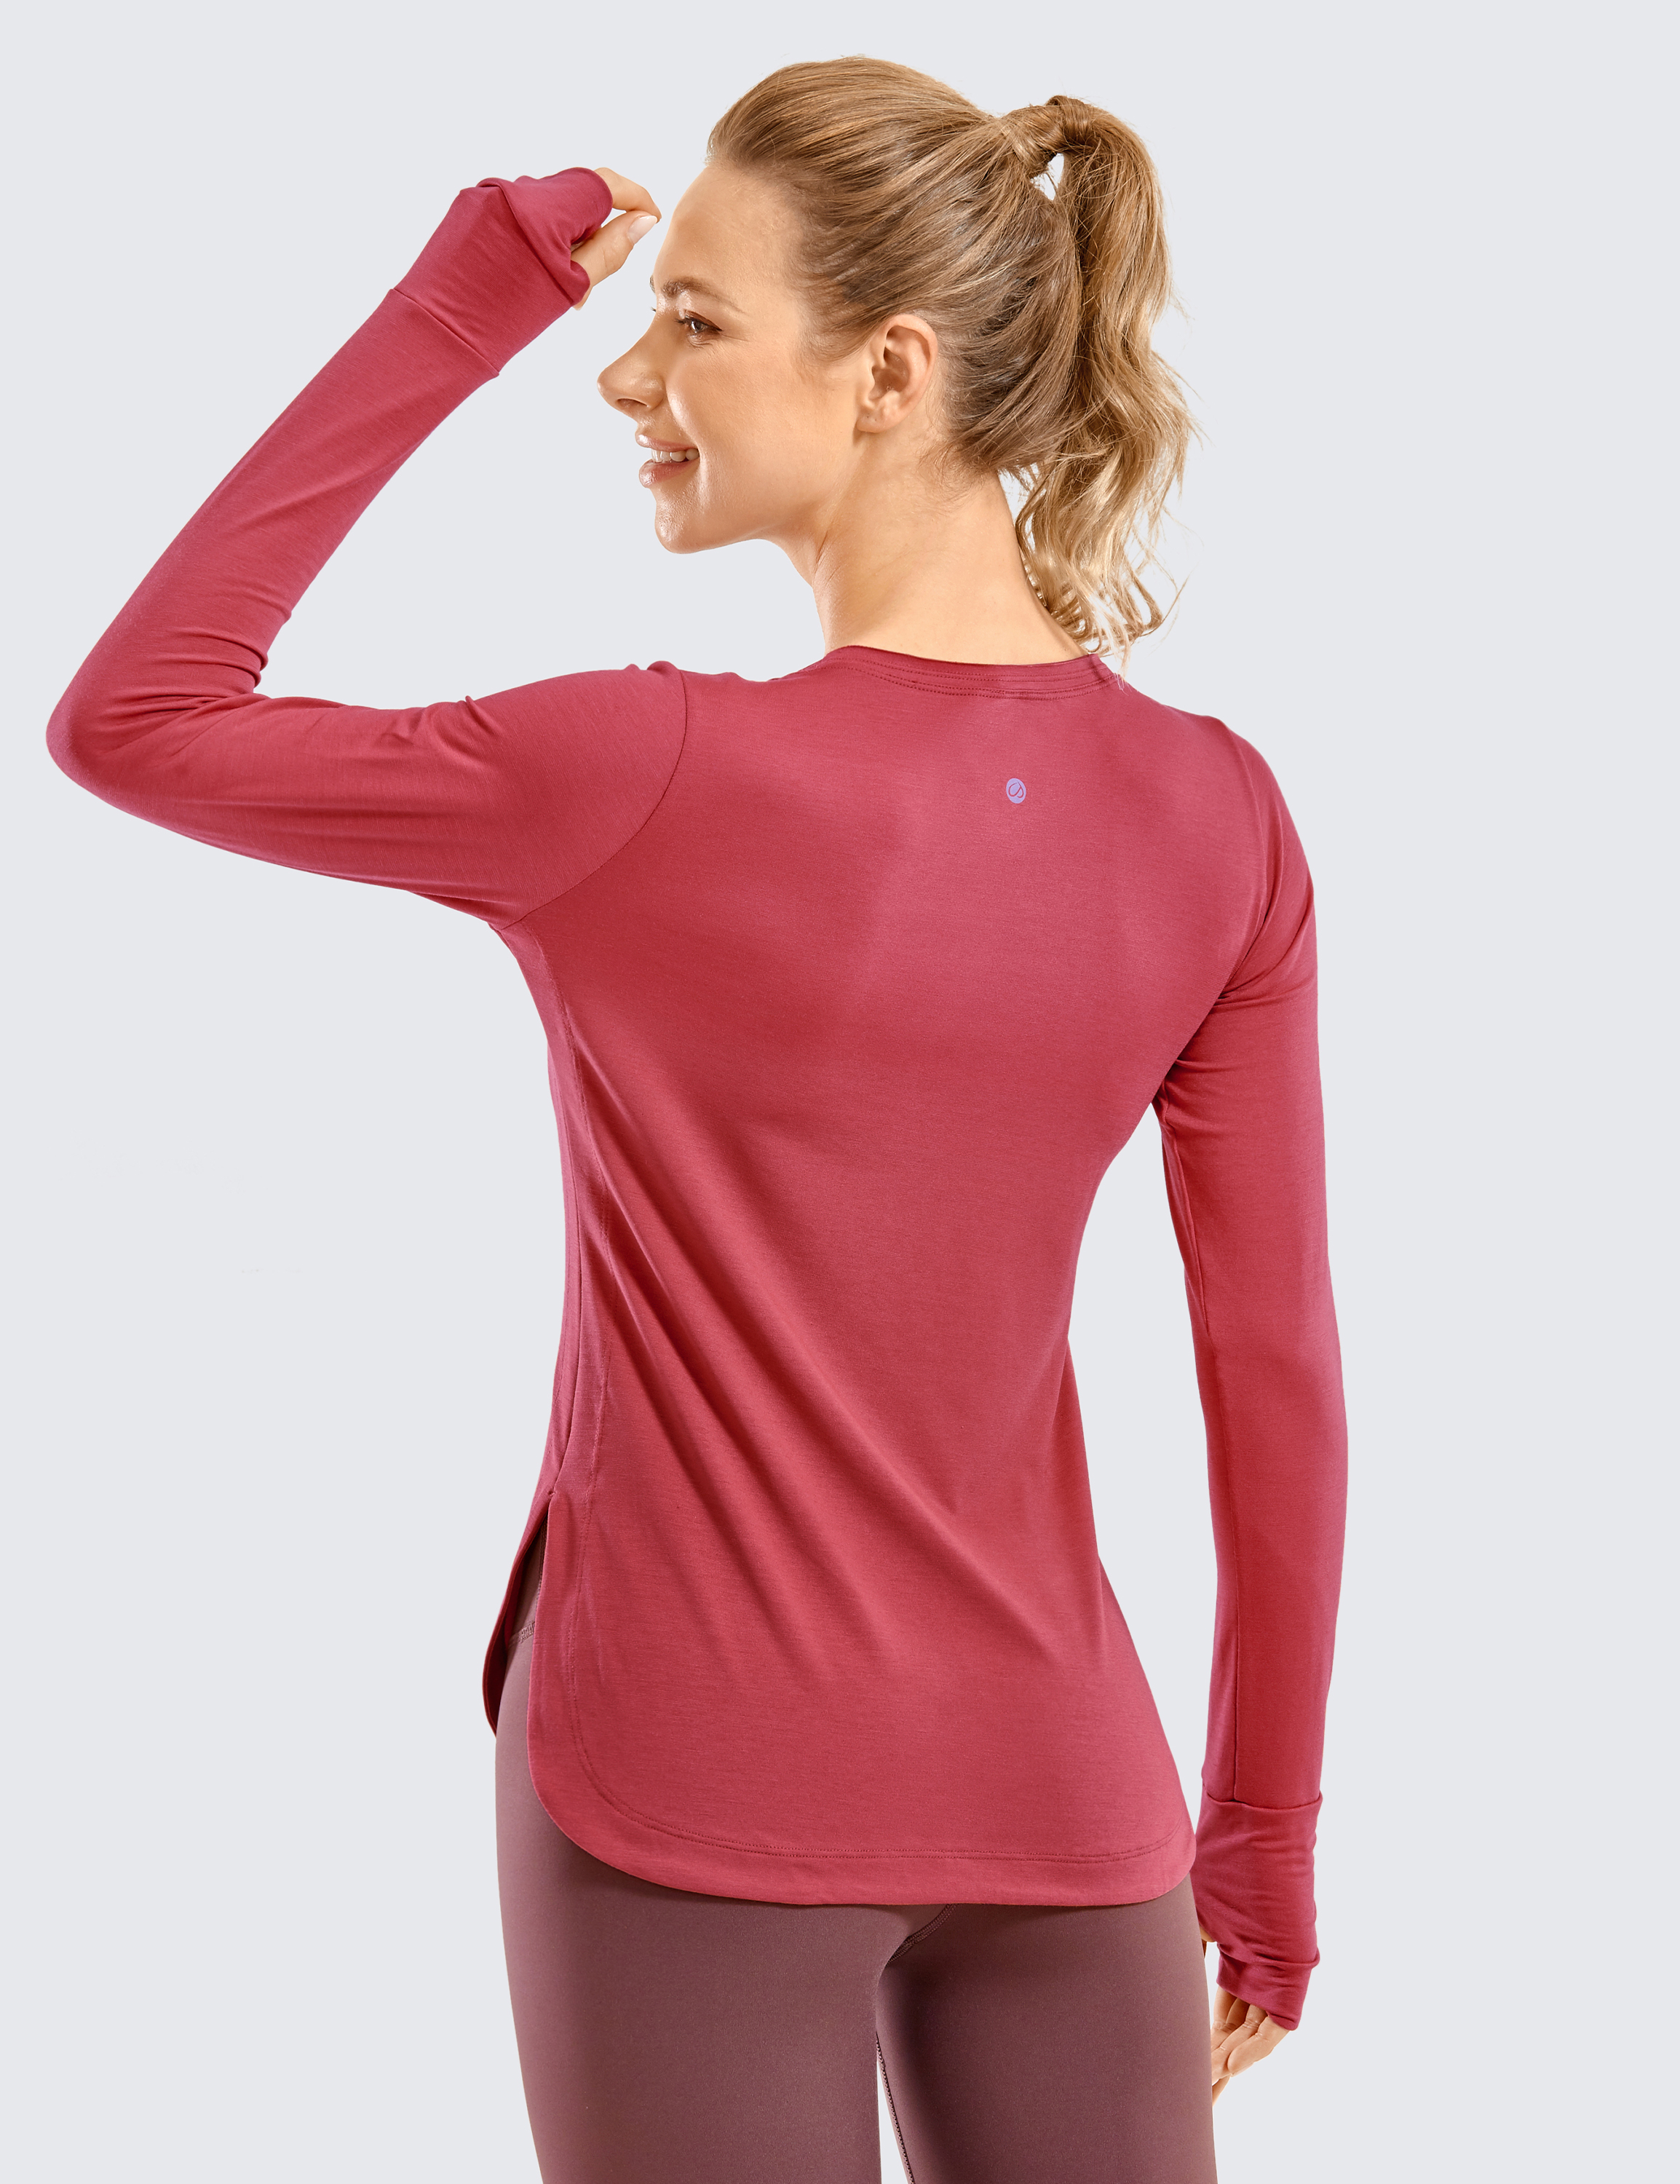 Yoga Tops For Women  International Society of Precision Agriculture